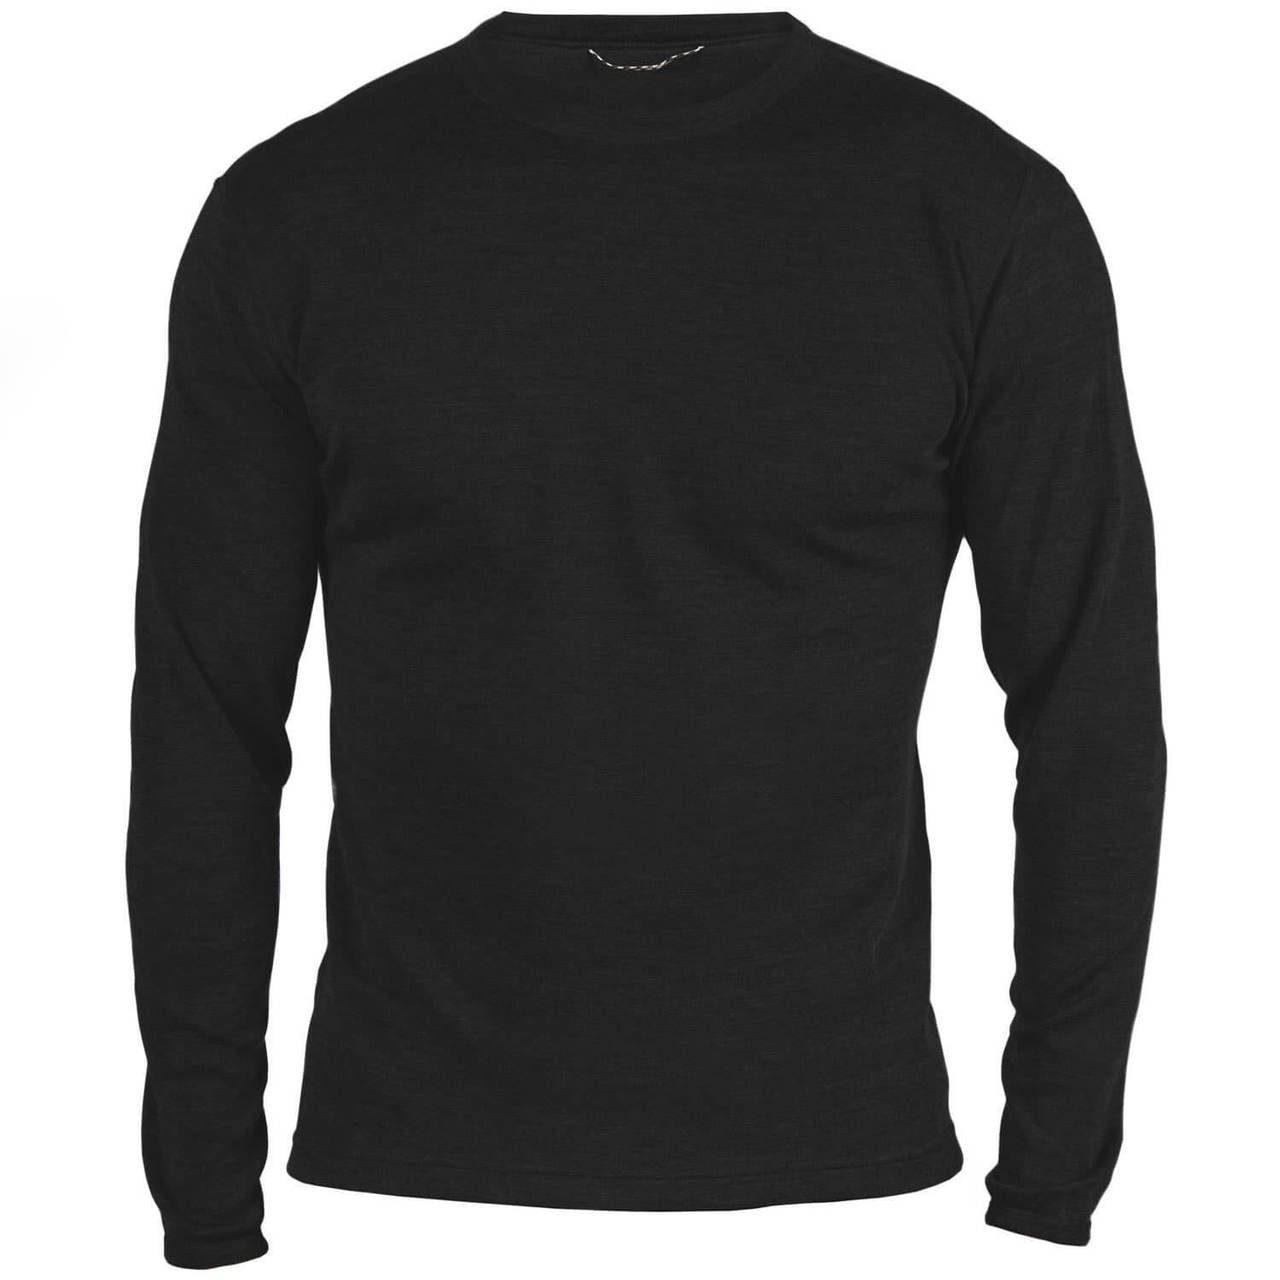 Best Cold Weather Bow Hunting Clothing - Base Layer - MERIWOOL Merino Wool Midweight Thermal Top